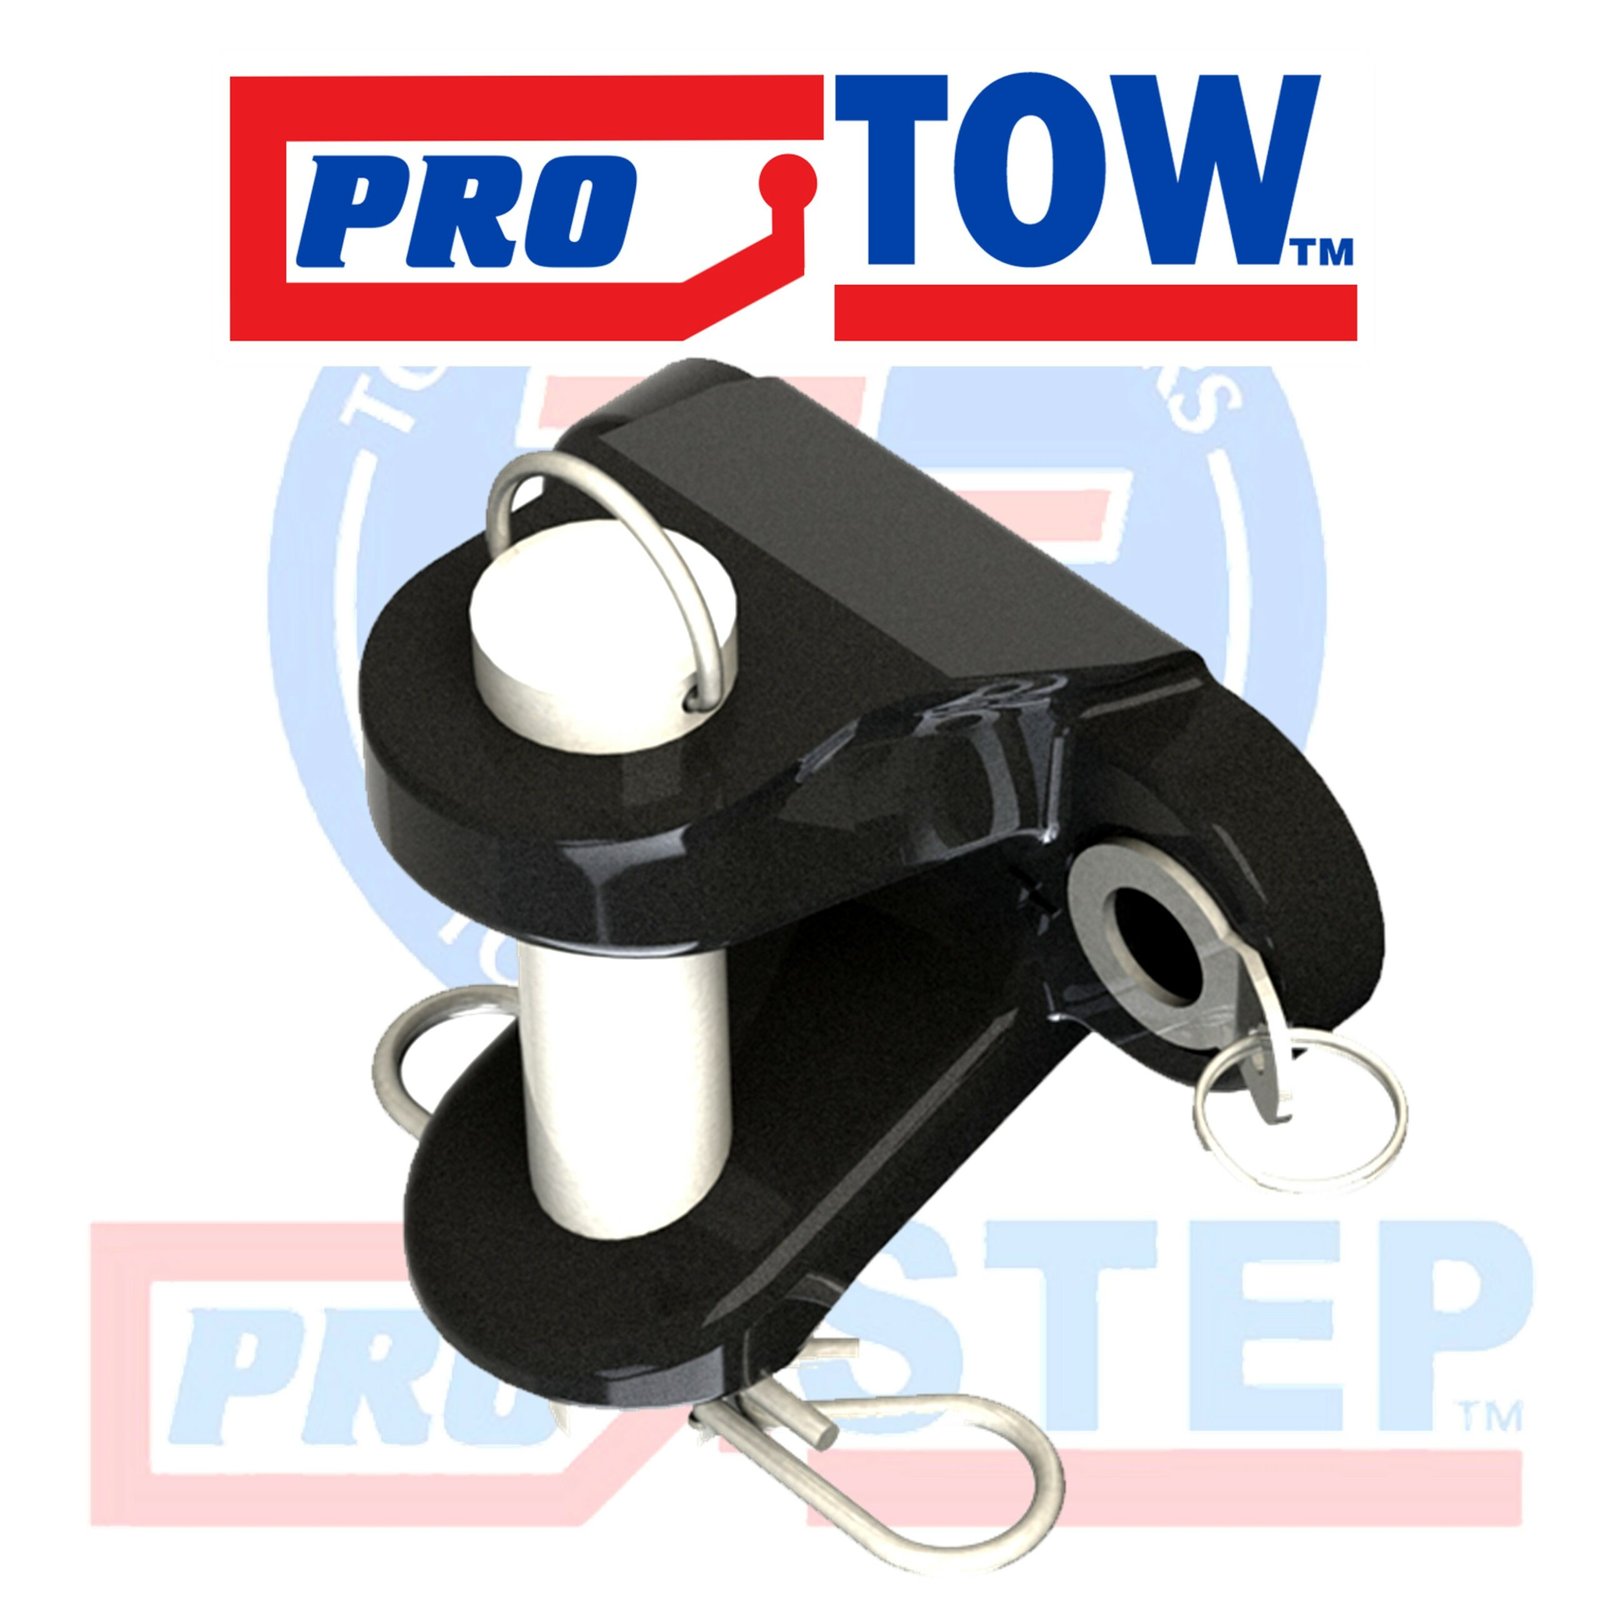 PRO-TOW 2 Bolt Jaw Only AJAW-2B